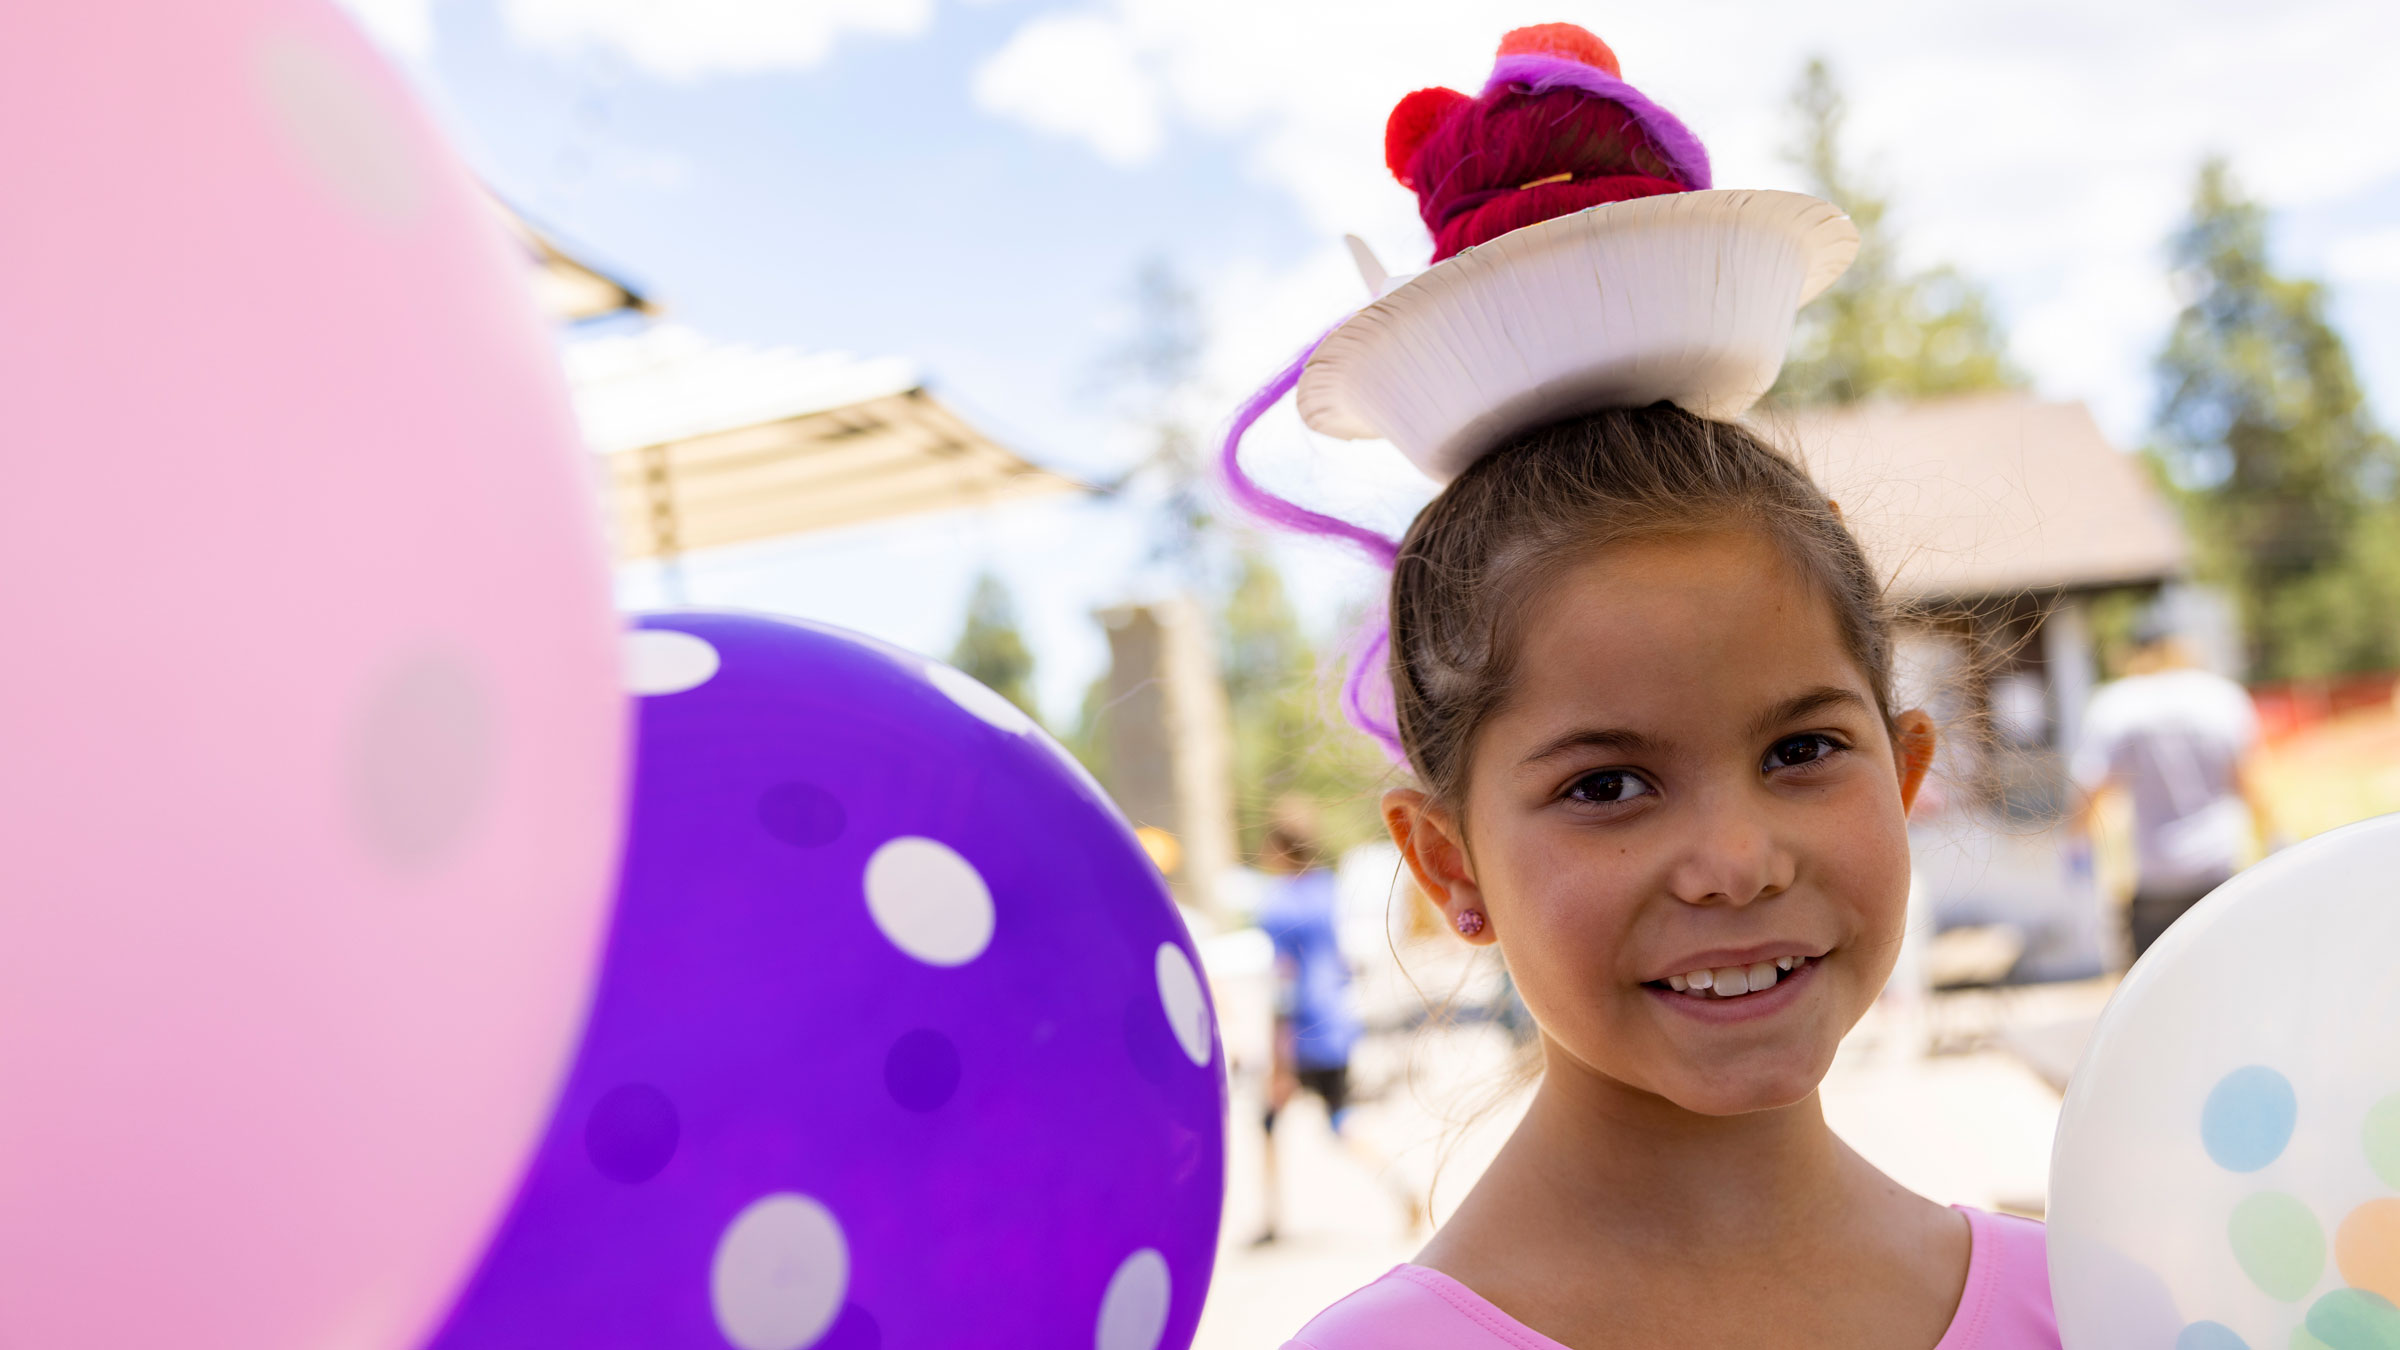 Young girl wearing a party hat smiling near balloons